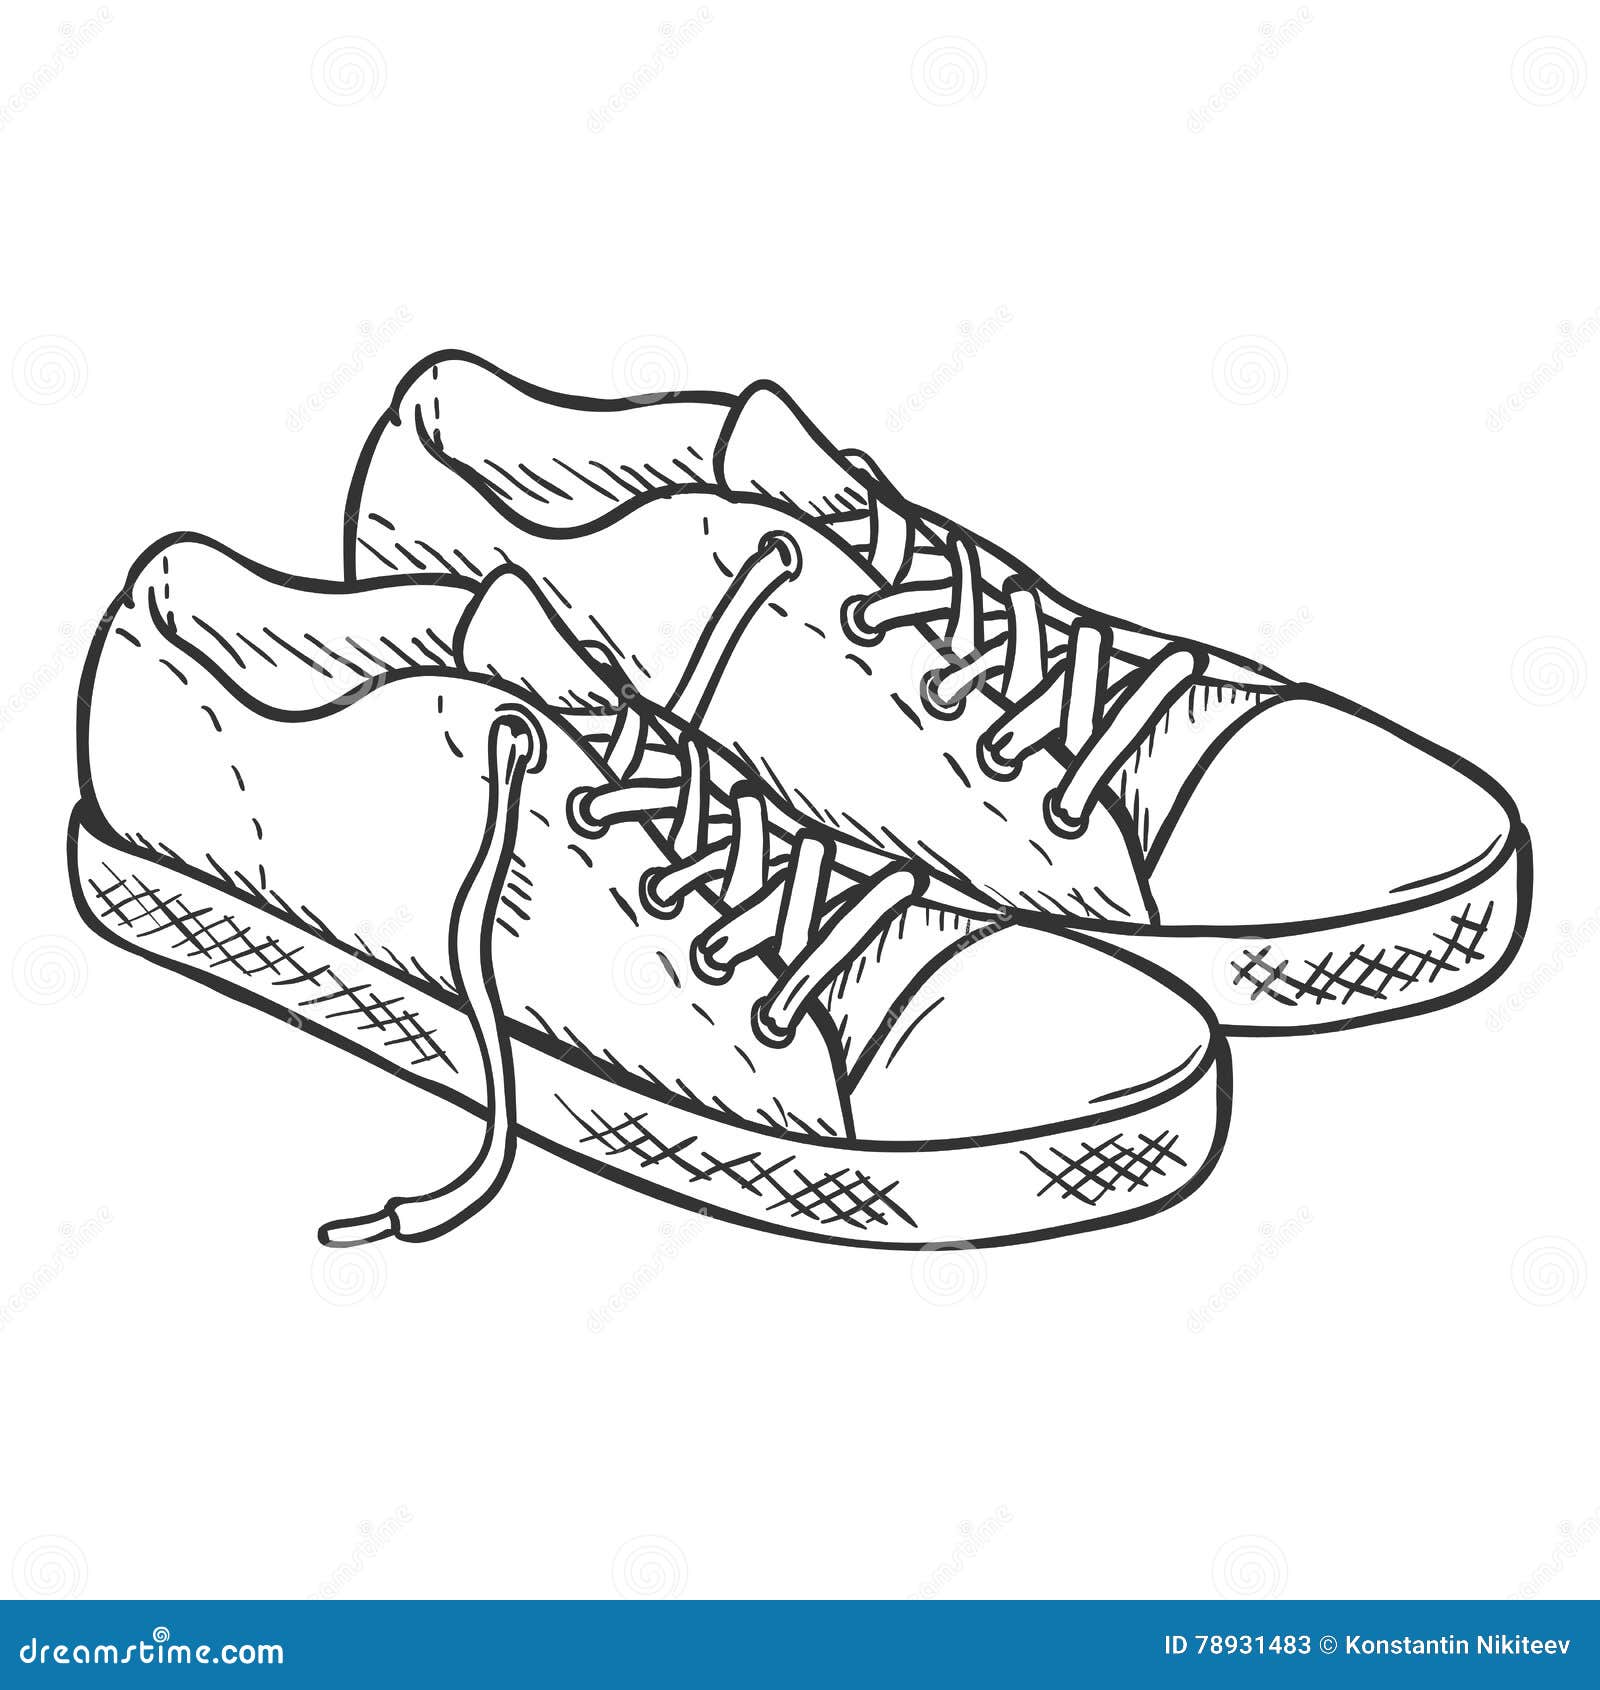 Vector Sketch Illustration Pair Of Casual Gumshoes Stock Vector Illustration Of Sign Pair 78931483 This tutorial will show you how to draw high heels, tennis shoes, sandals, and men's shoes. dreamstime com